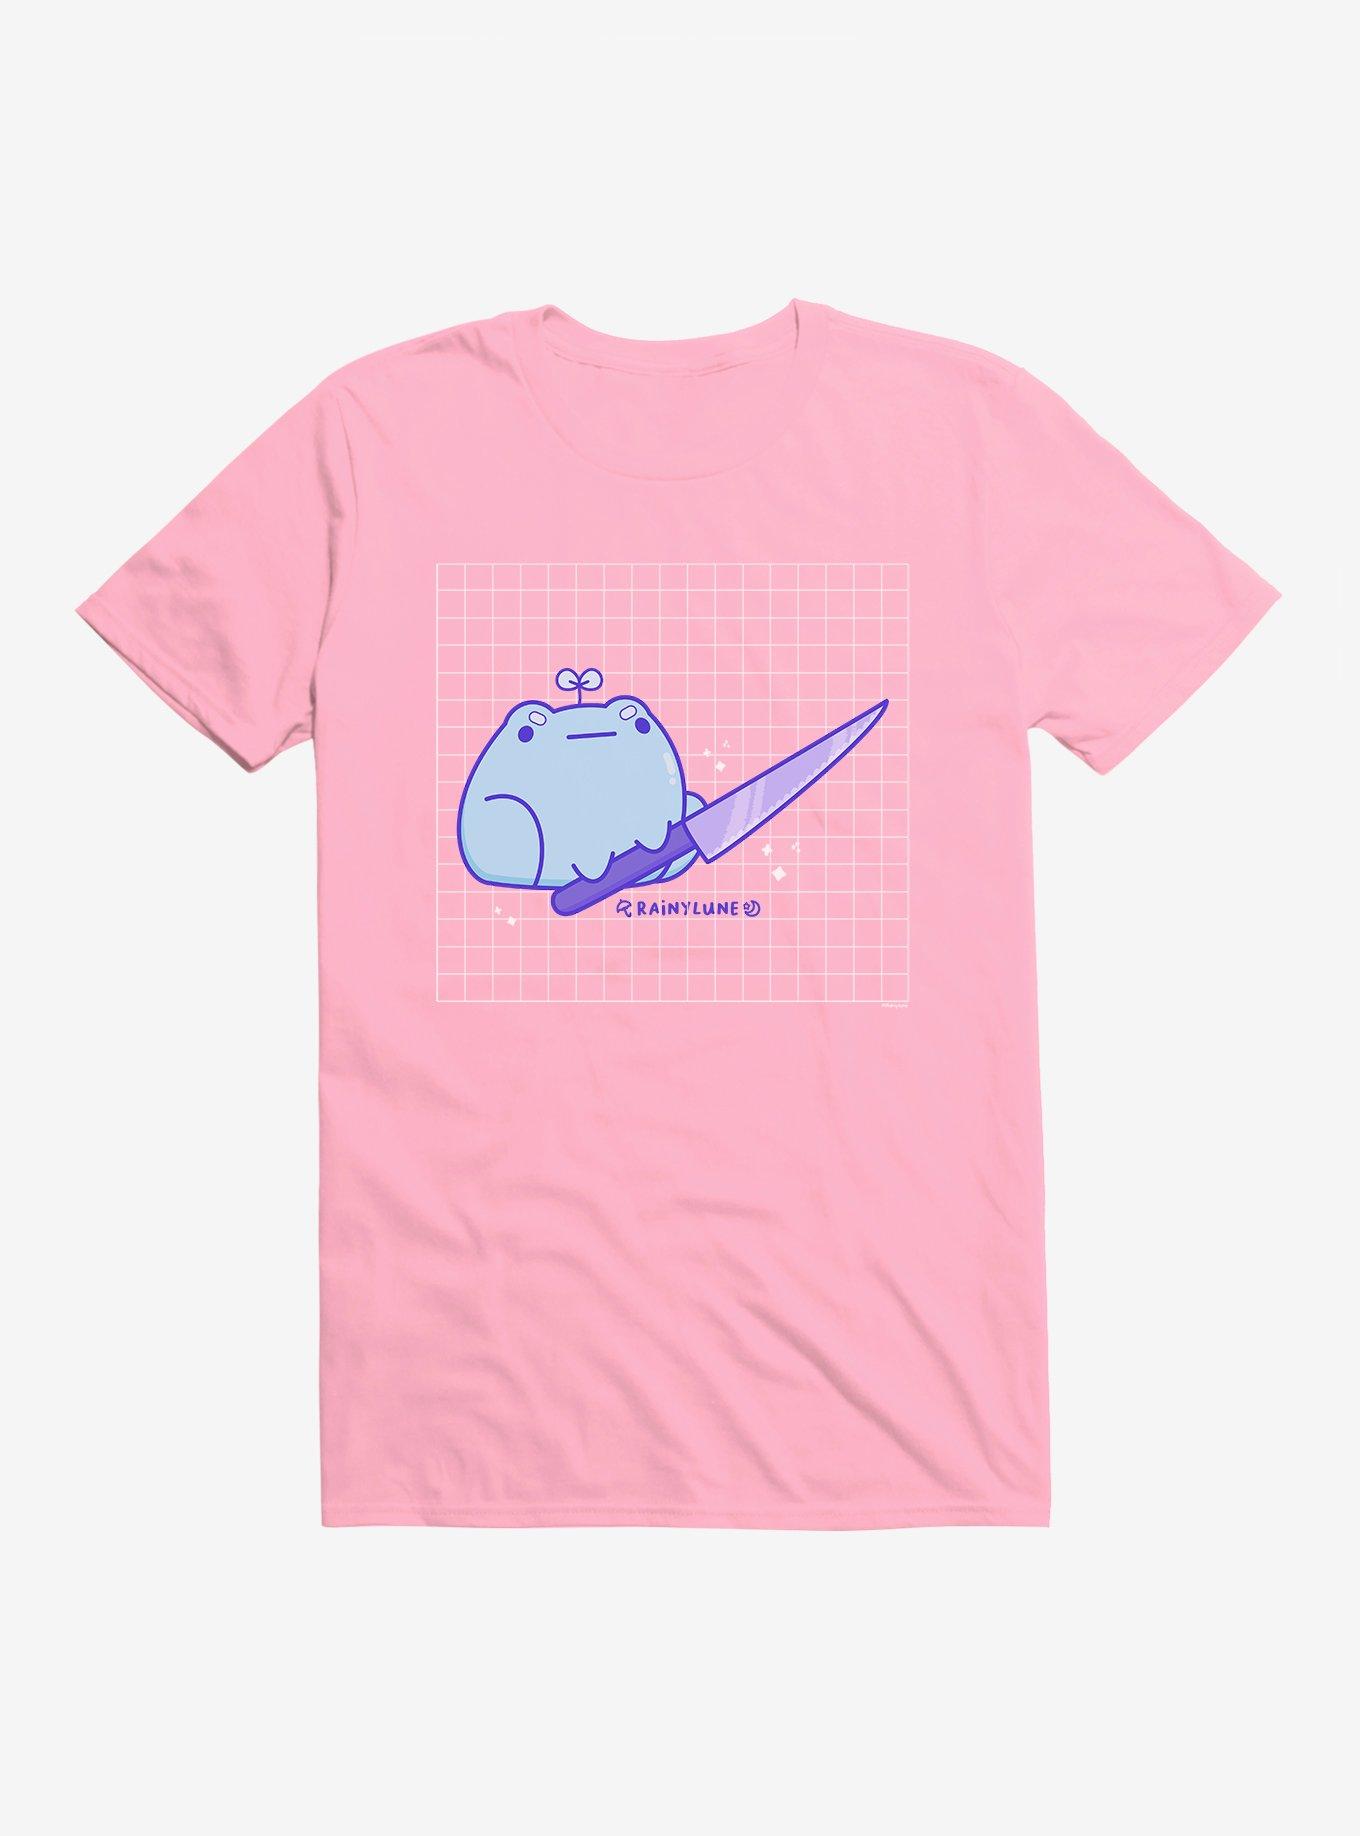 Rainylune Sprout The Frog Knife Fight T-Shirt, LIGHT PINK, hi-res